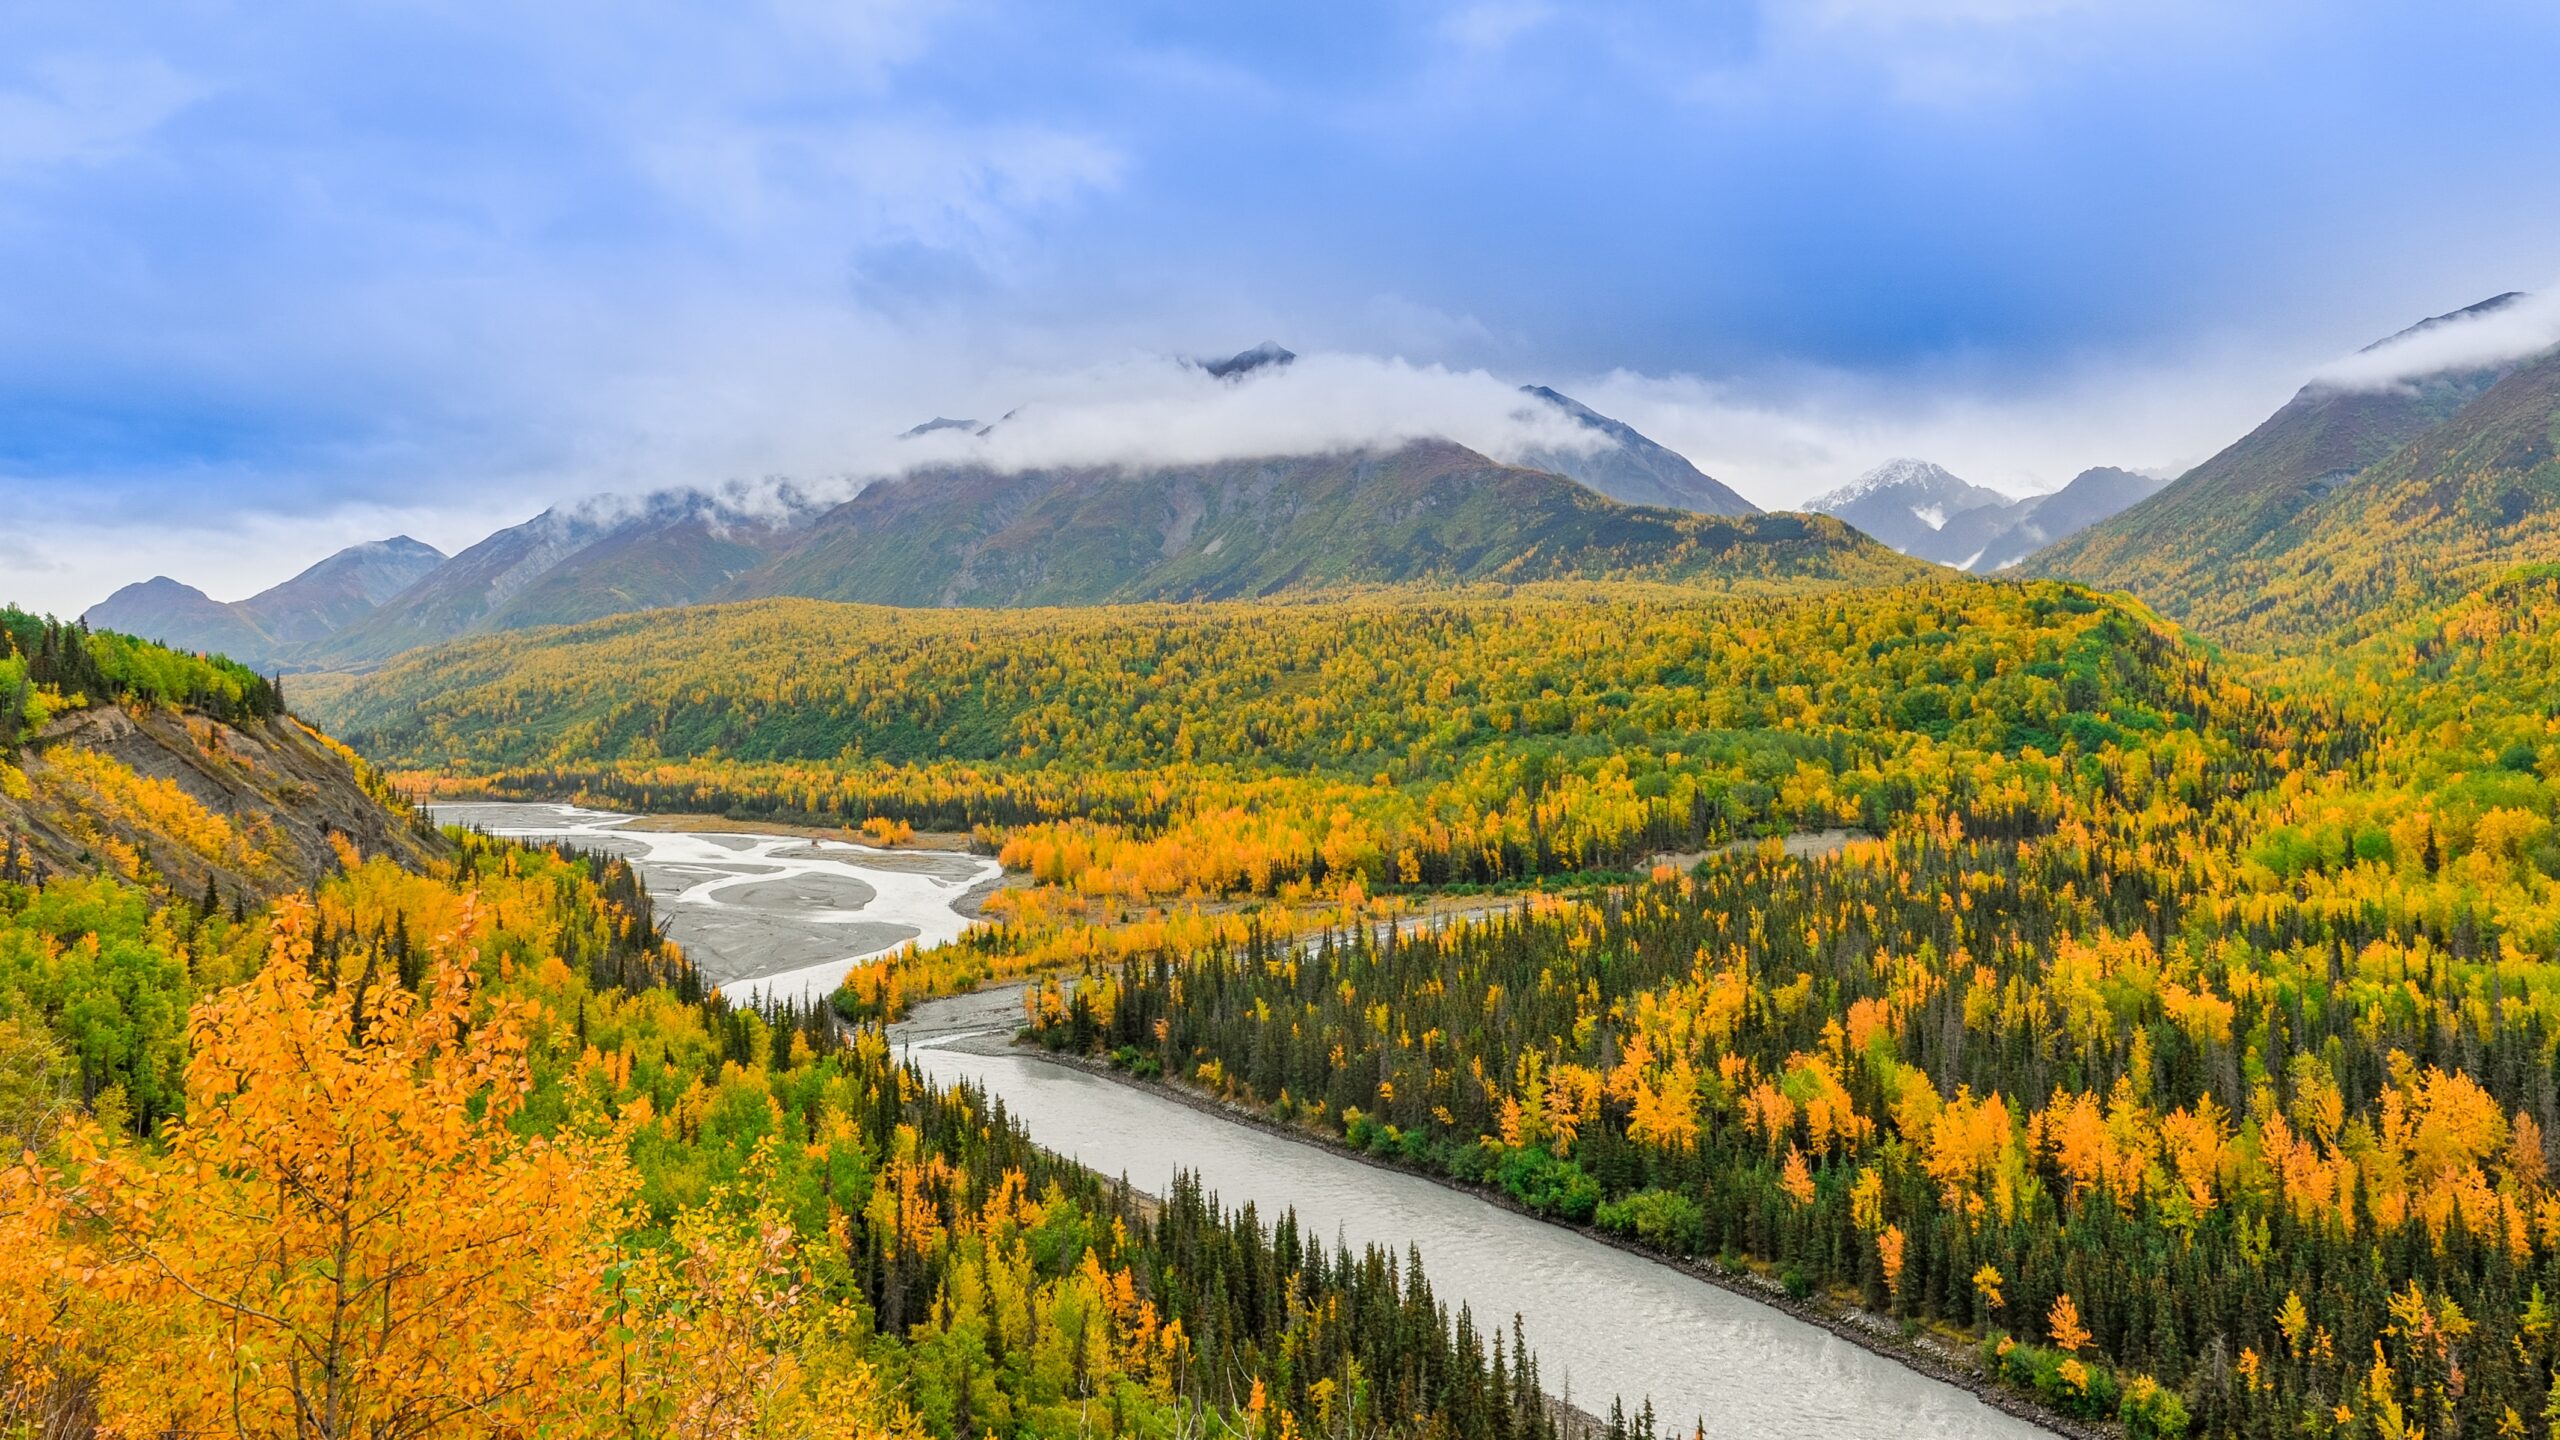 If you're looking to live in Alaska's largest city, Anchorage is one of the best places to live. Pictured: The mountain views of Anchorage, Alaska.